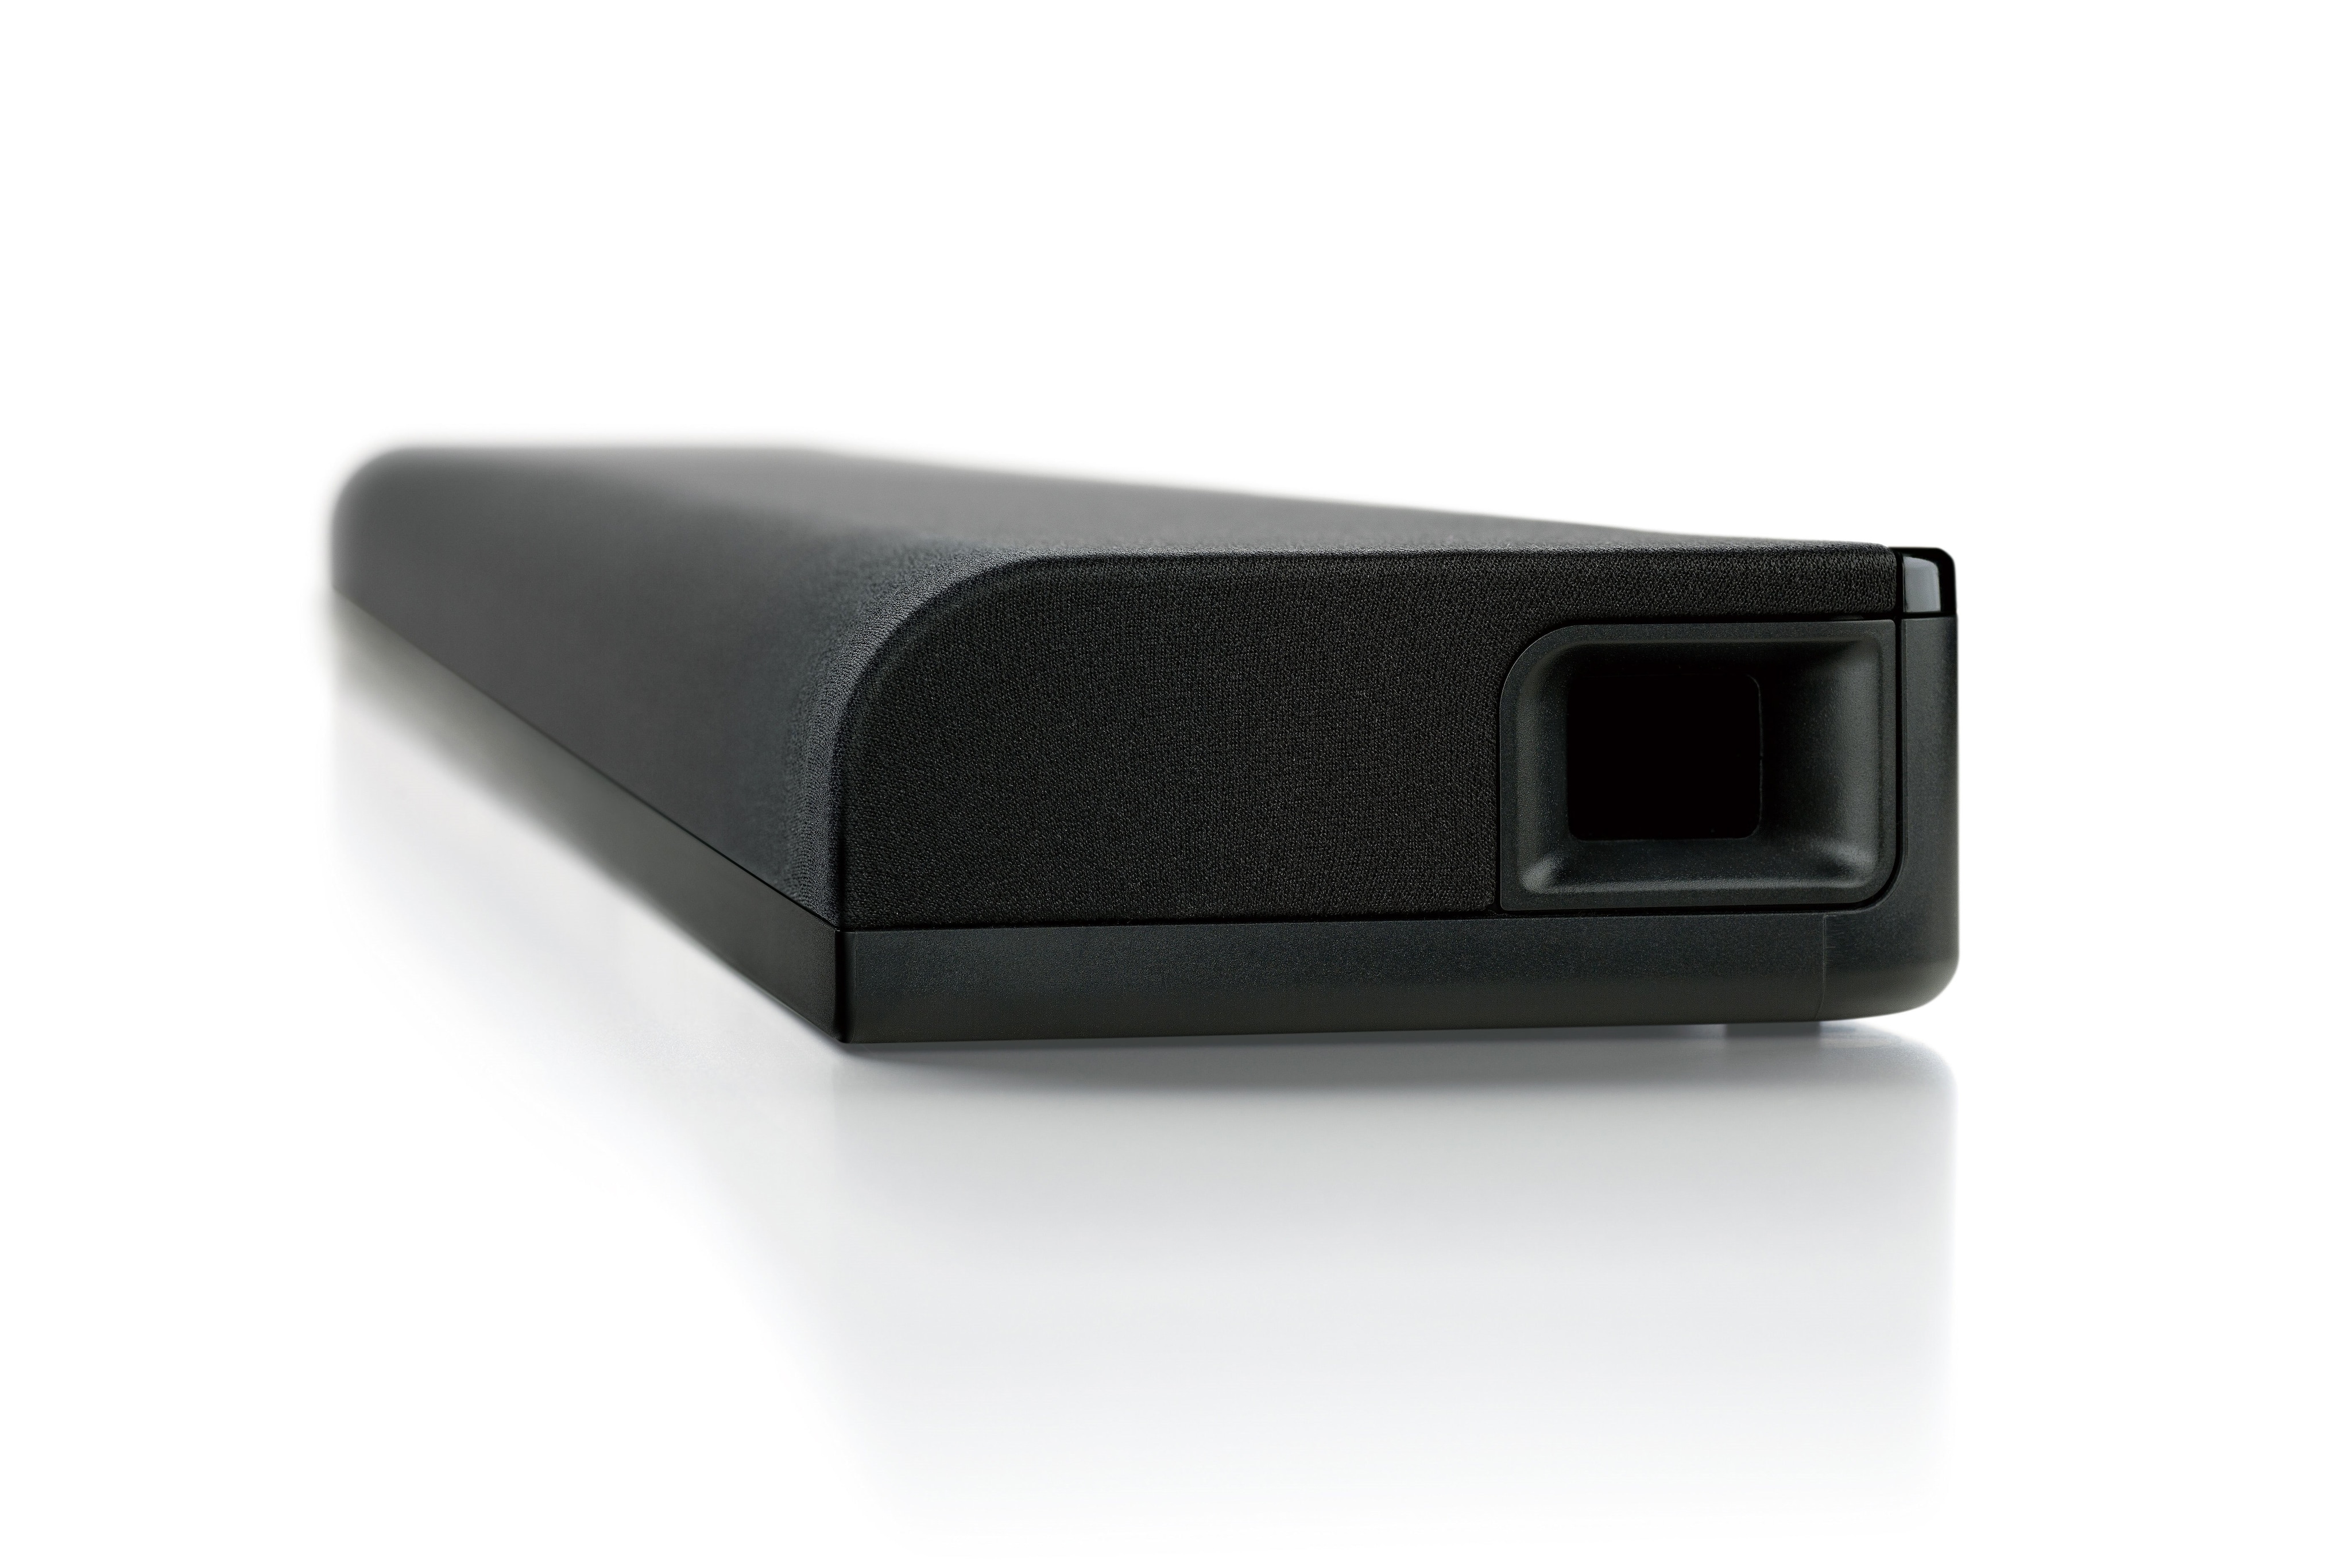 YAS-105 - Overview - Sound Bars - Audio & Visual - Products 